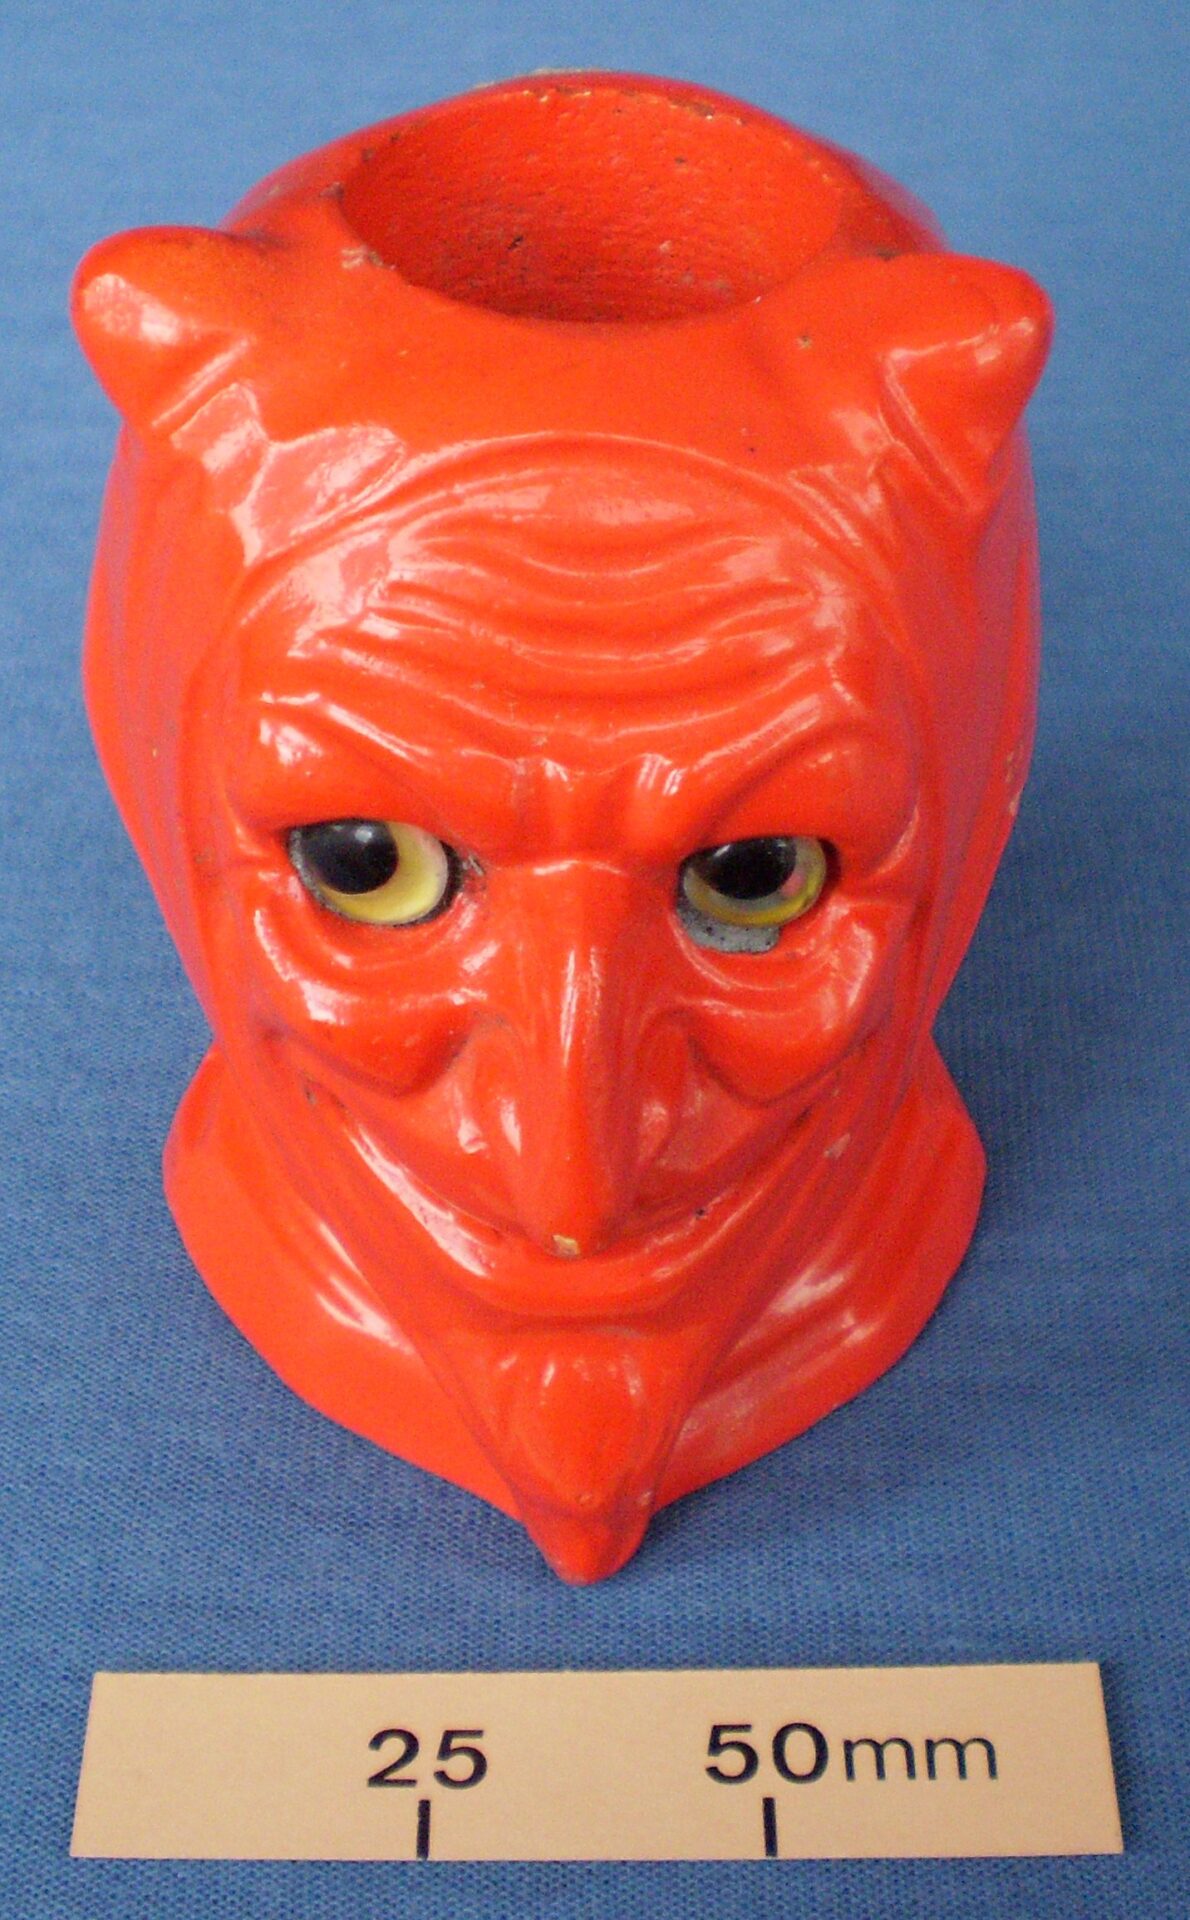 Red demon head match holder with striker on the back of the head